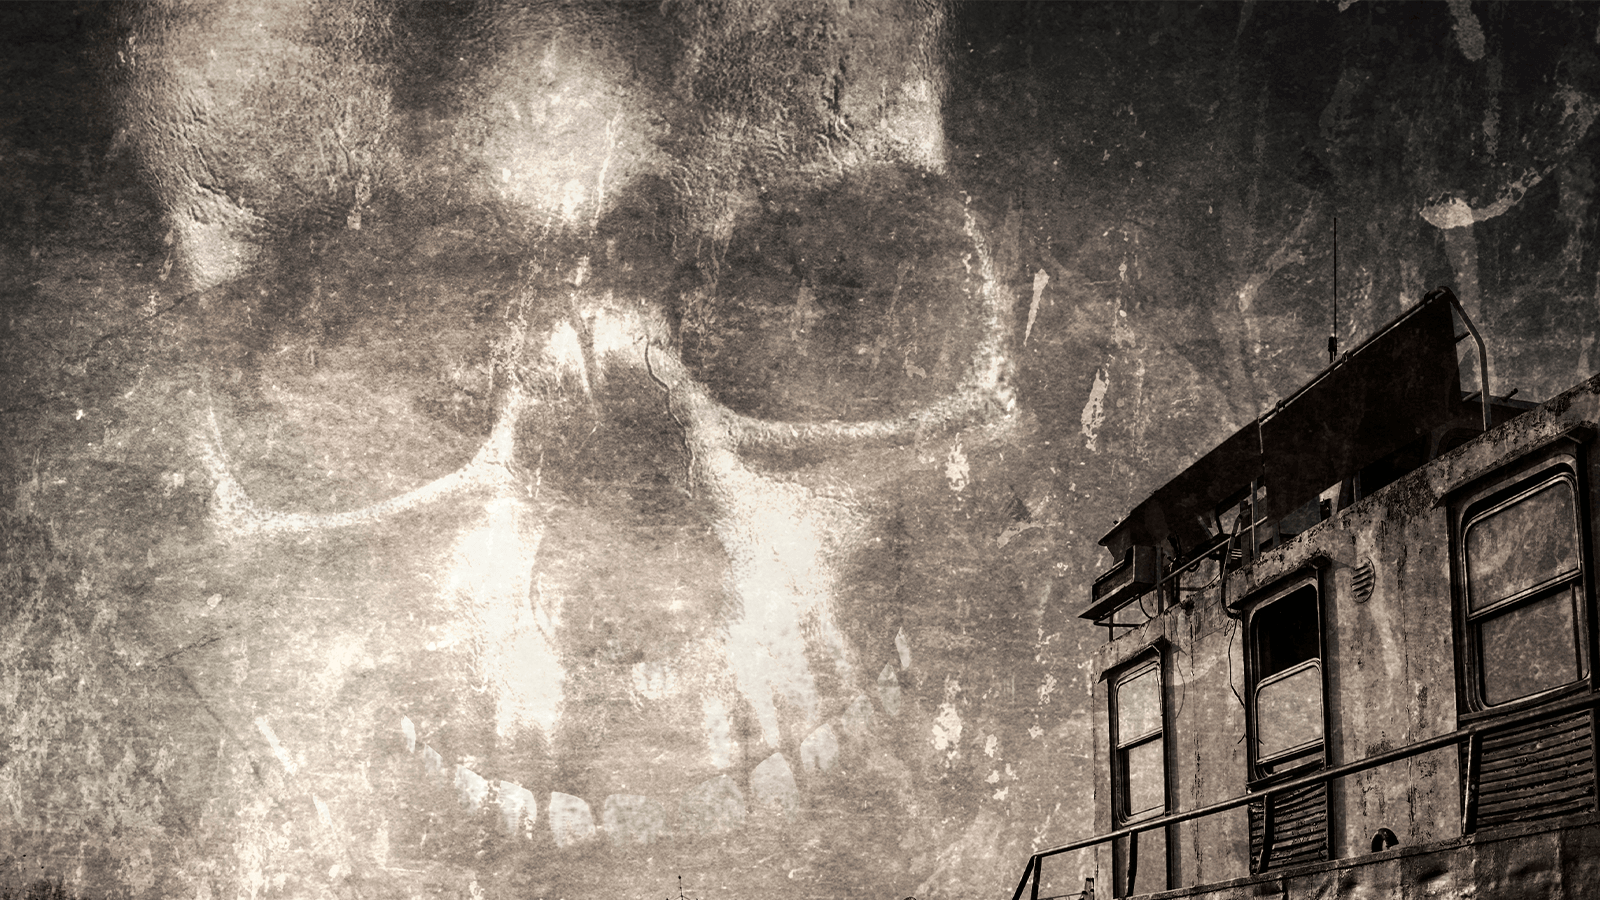 Some say the SS Baychimo became possessed - but by what? Credit: Shutterstock